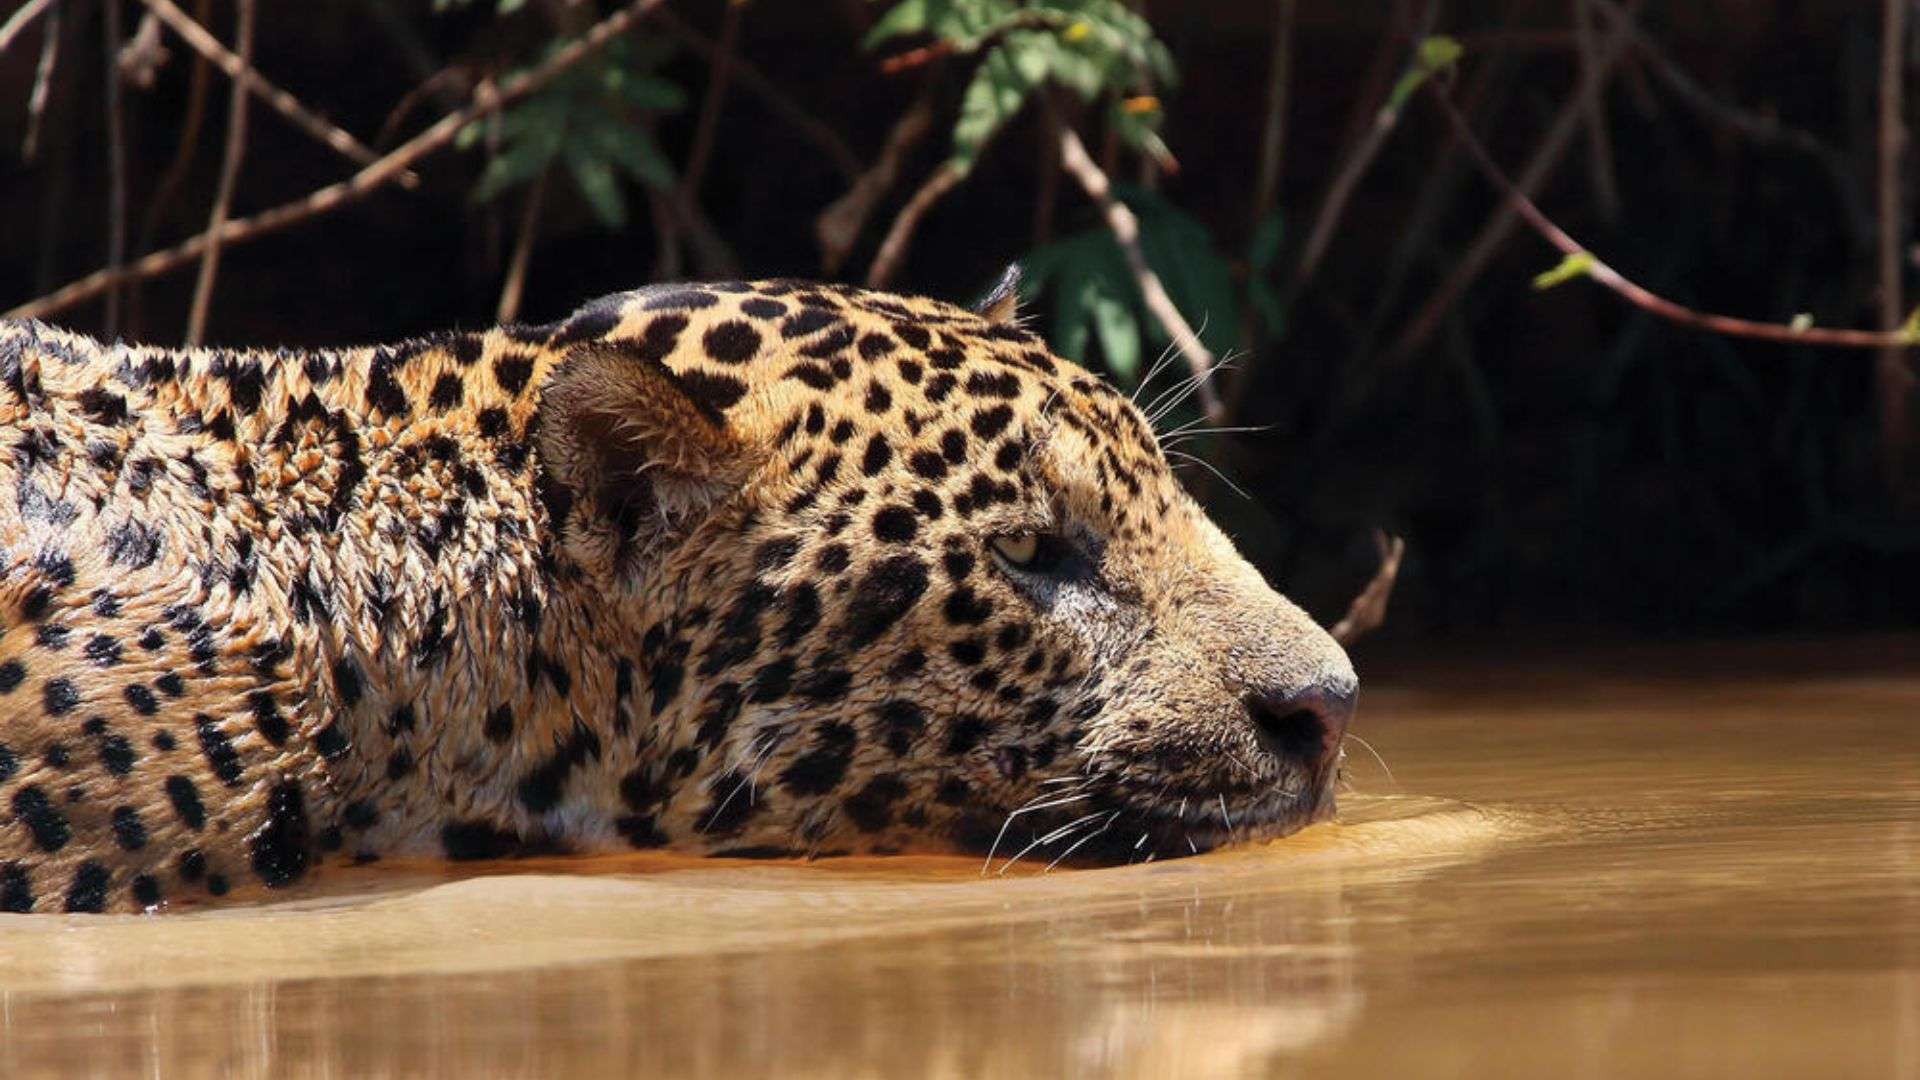 Jaguars are excellent swimmers and can often be found in waterways. Here, a jaguar takes a dip in a river in the Encontro das Águas State Park in the Brazilian Pantanal.